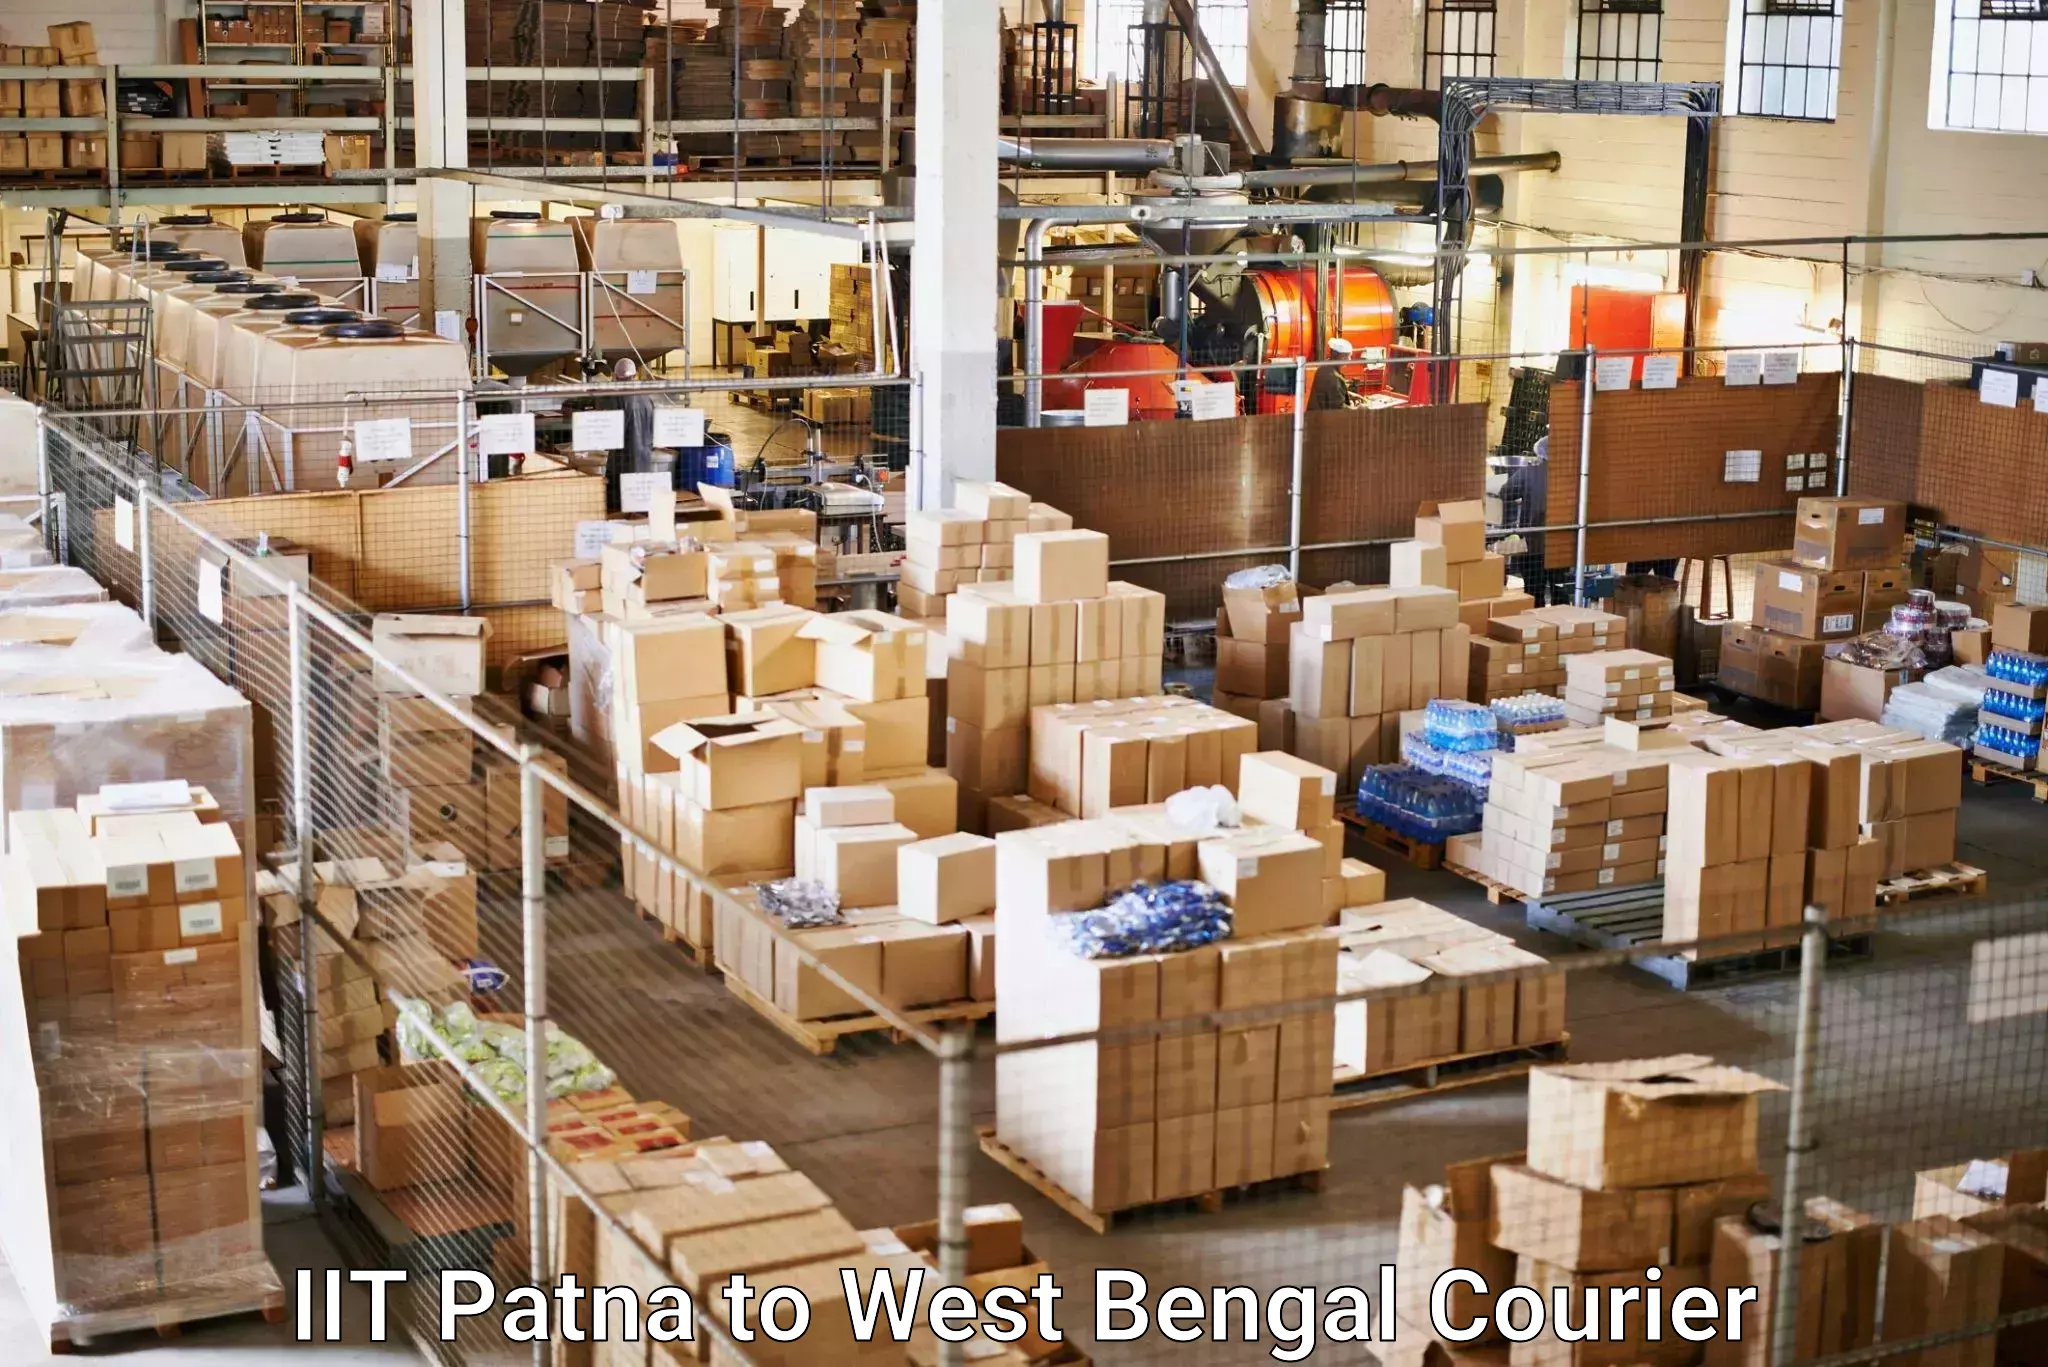 Business delivery service IIT Patna to Udaynarayanpur